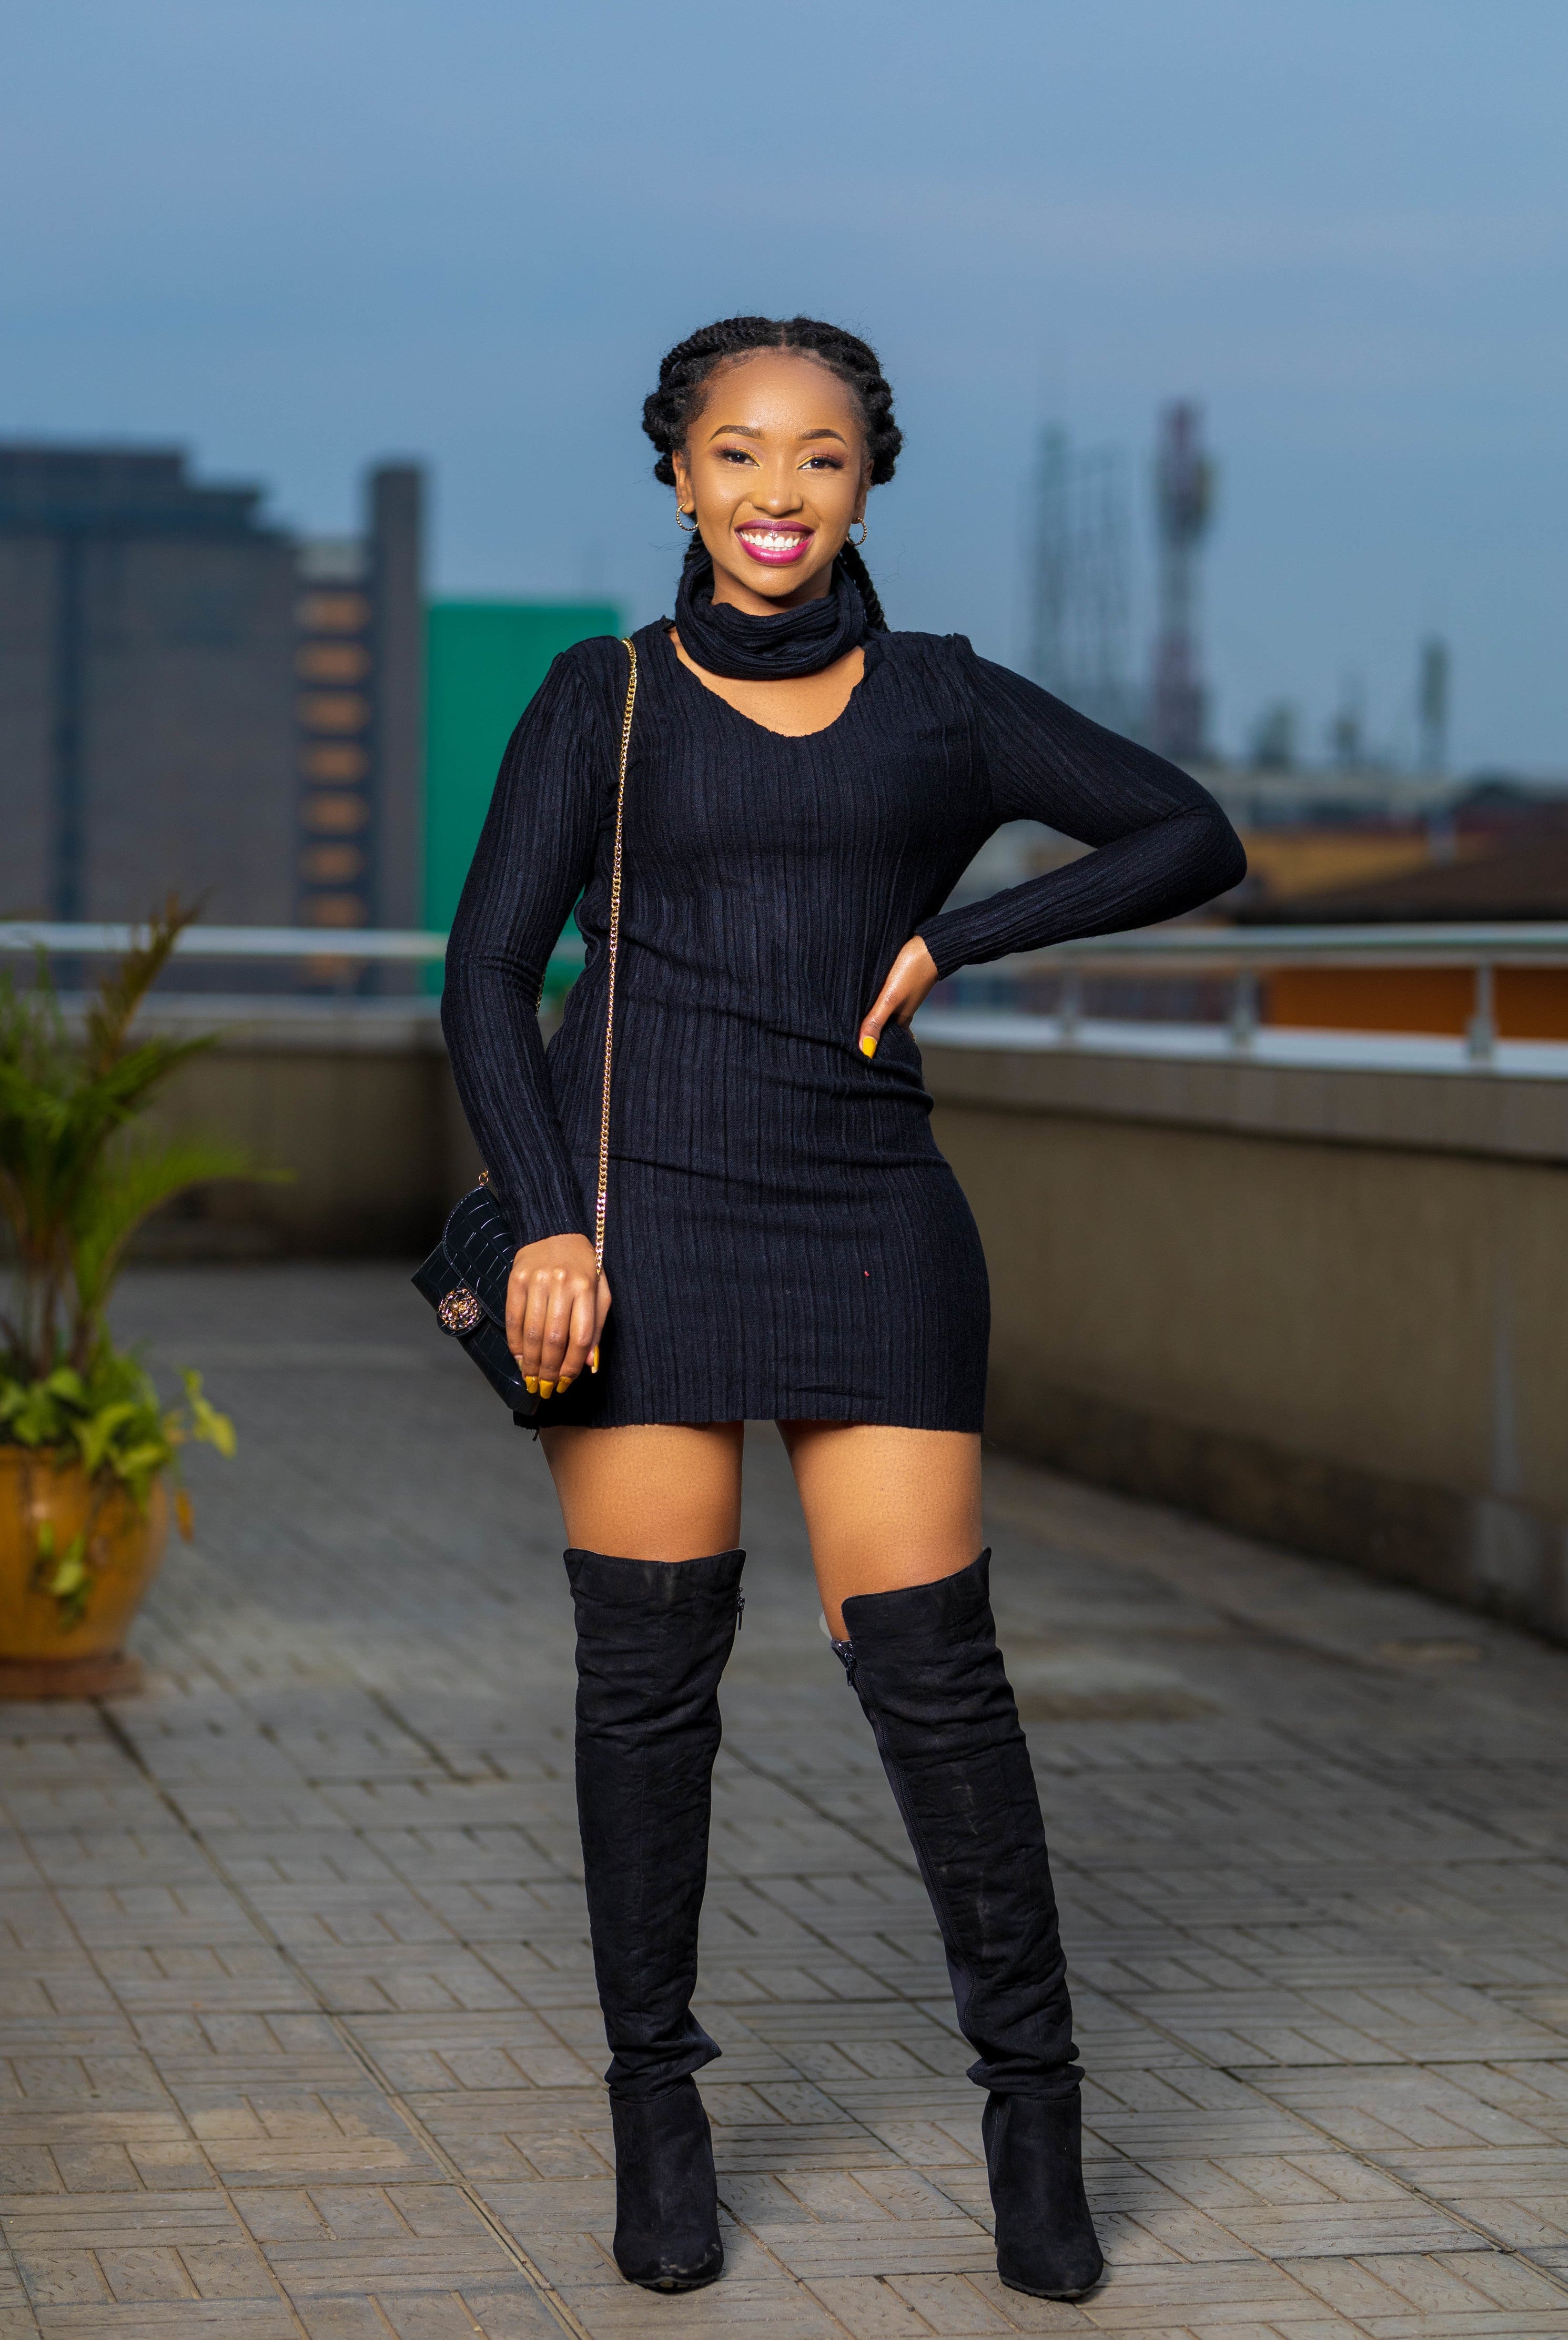 Kinsley Sweater - Shop Kenya - Affordable Fashion Kinsley Sweater hiiii_style Shirts & Tops kinsley-sweater August 2022, cessy._.patel, officialkoicurvy, winnie_njenga Shop Kenya - Affordable Fashion